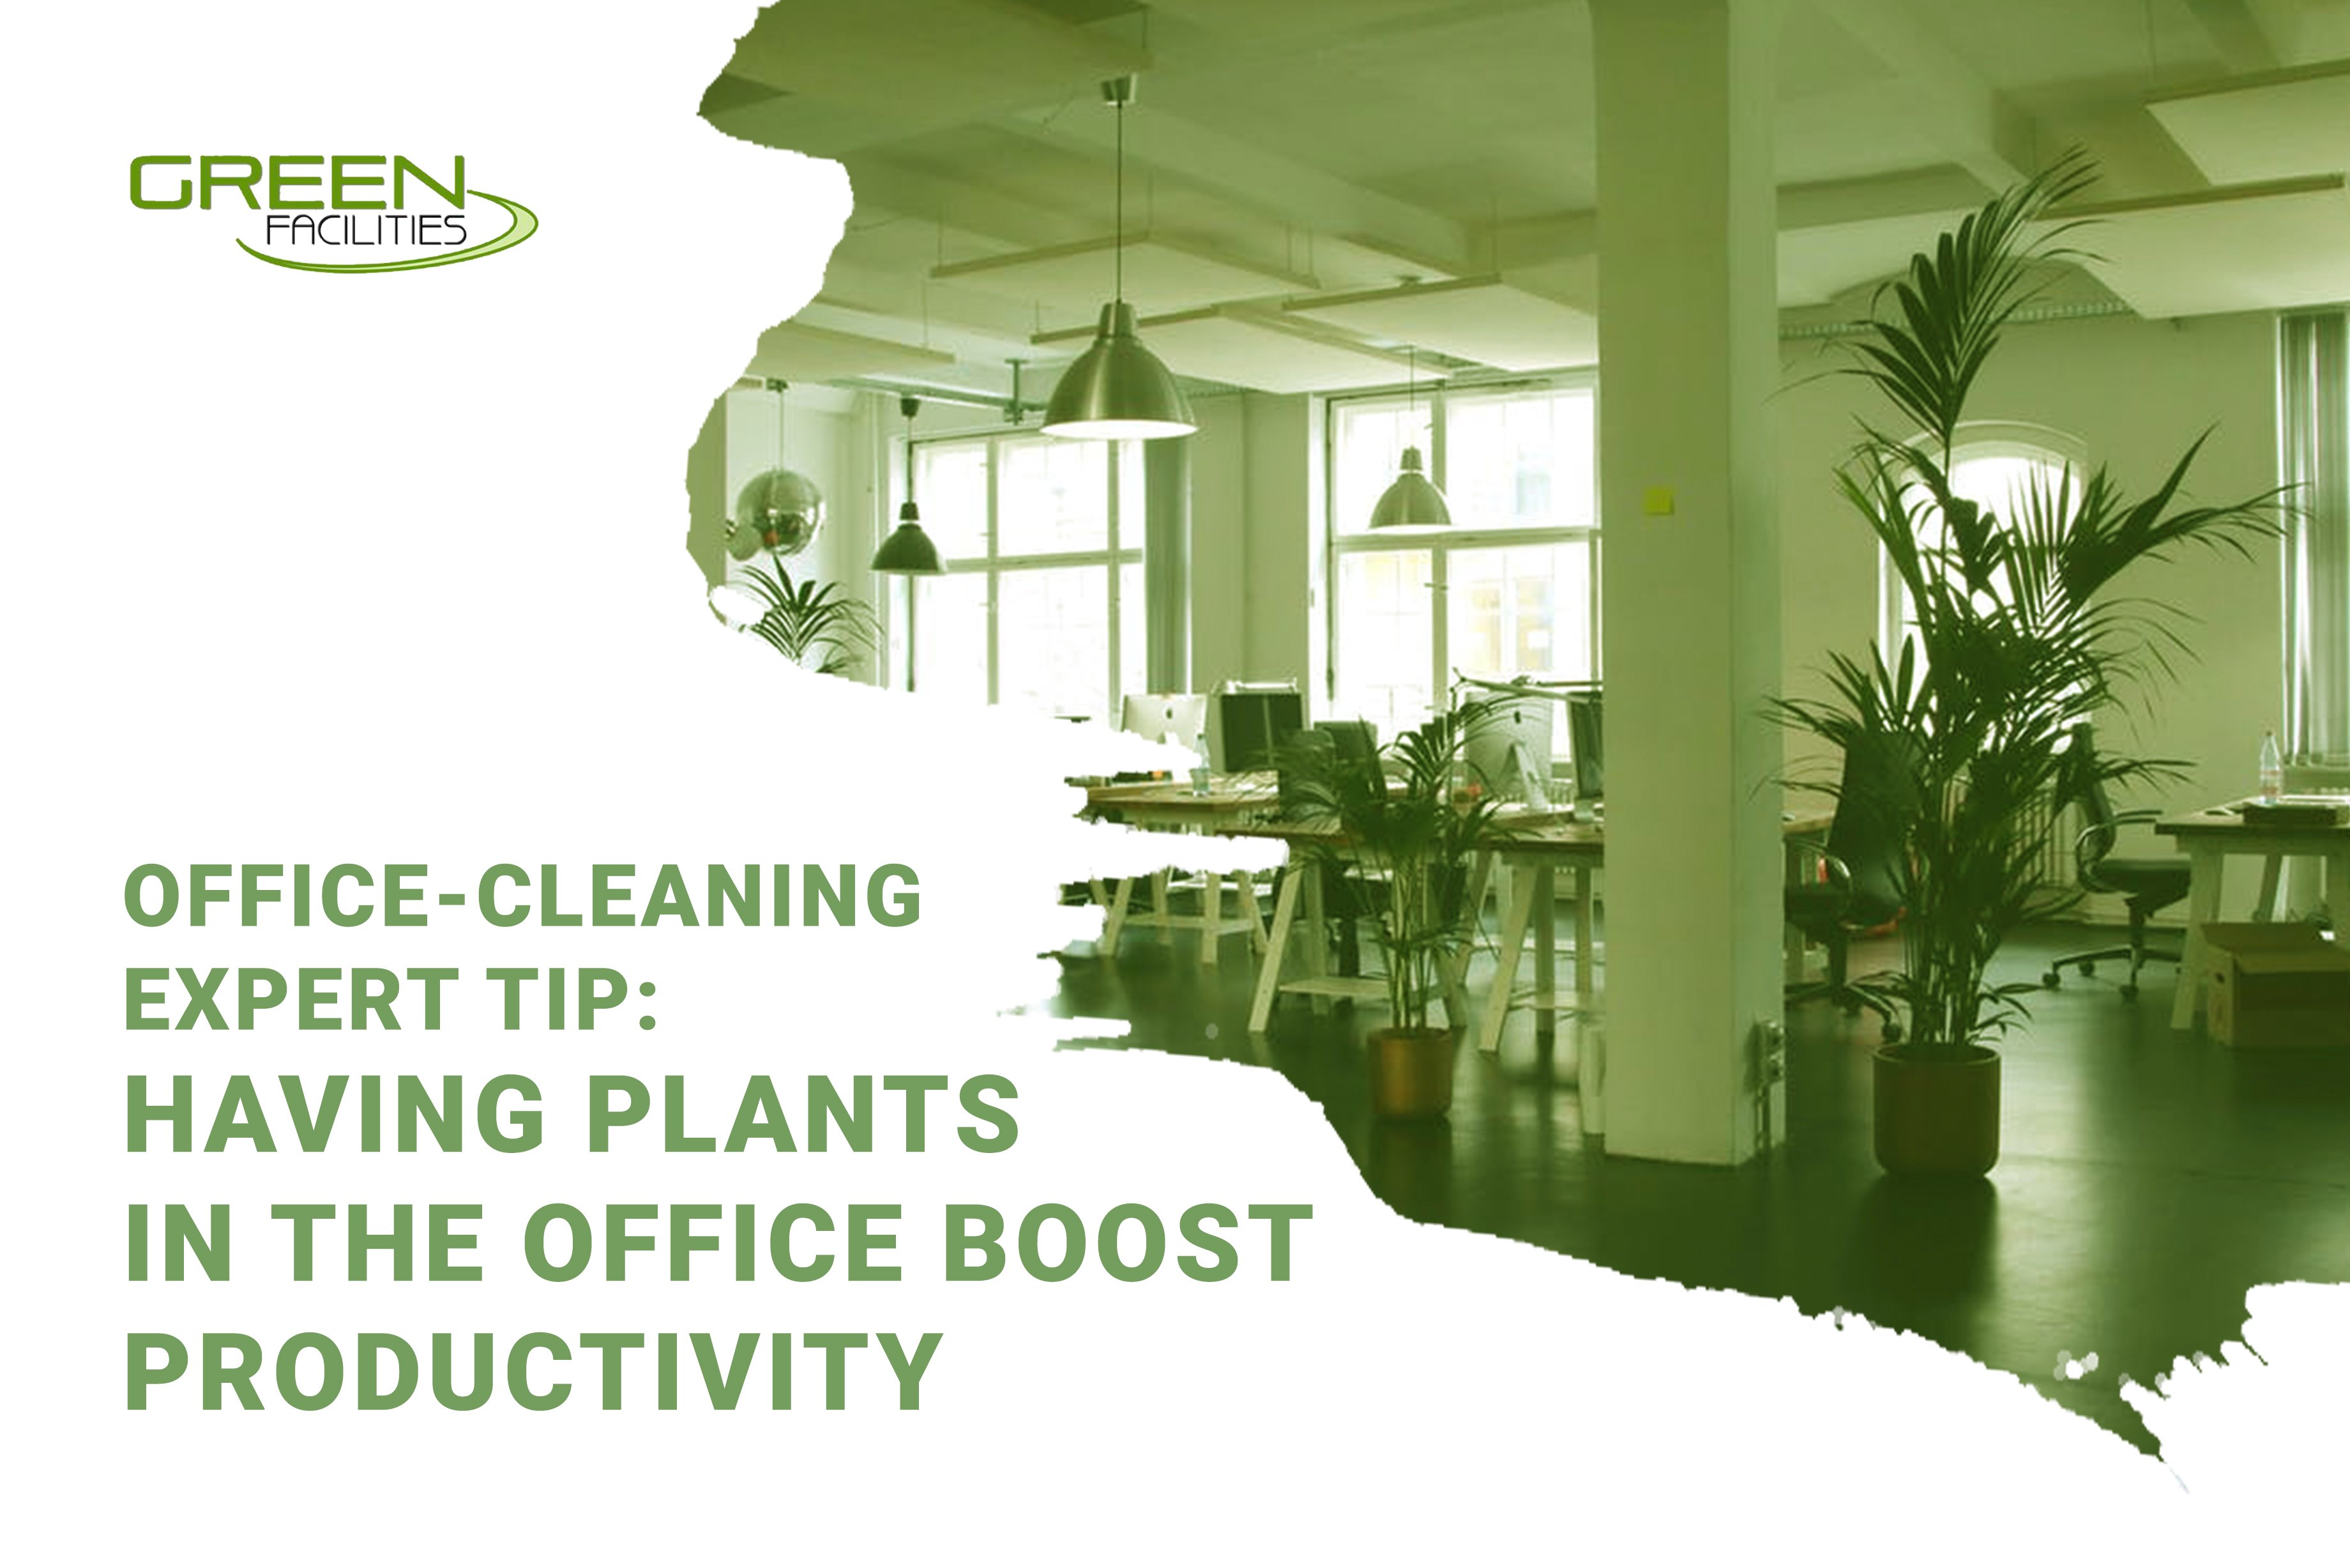 Office-Cleaning Expert Tip: Having Plants in the Office Boost Productivity